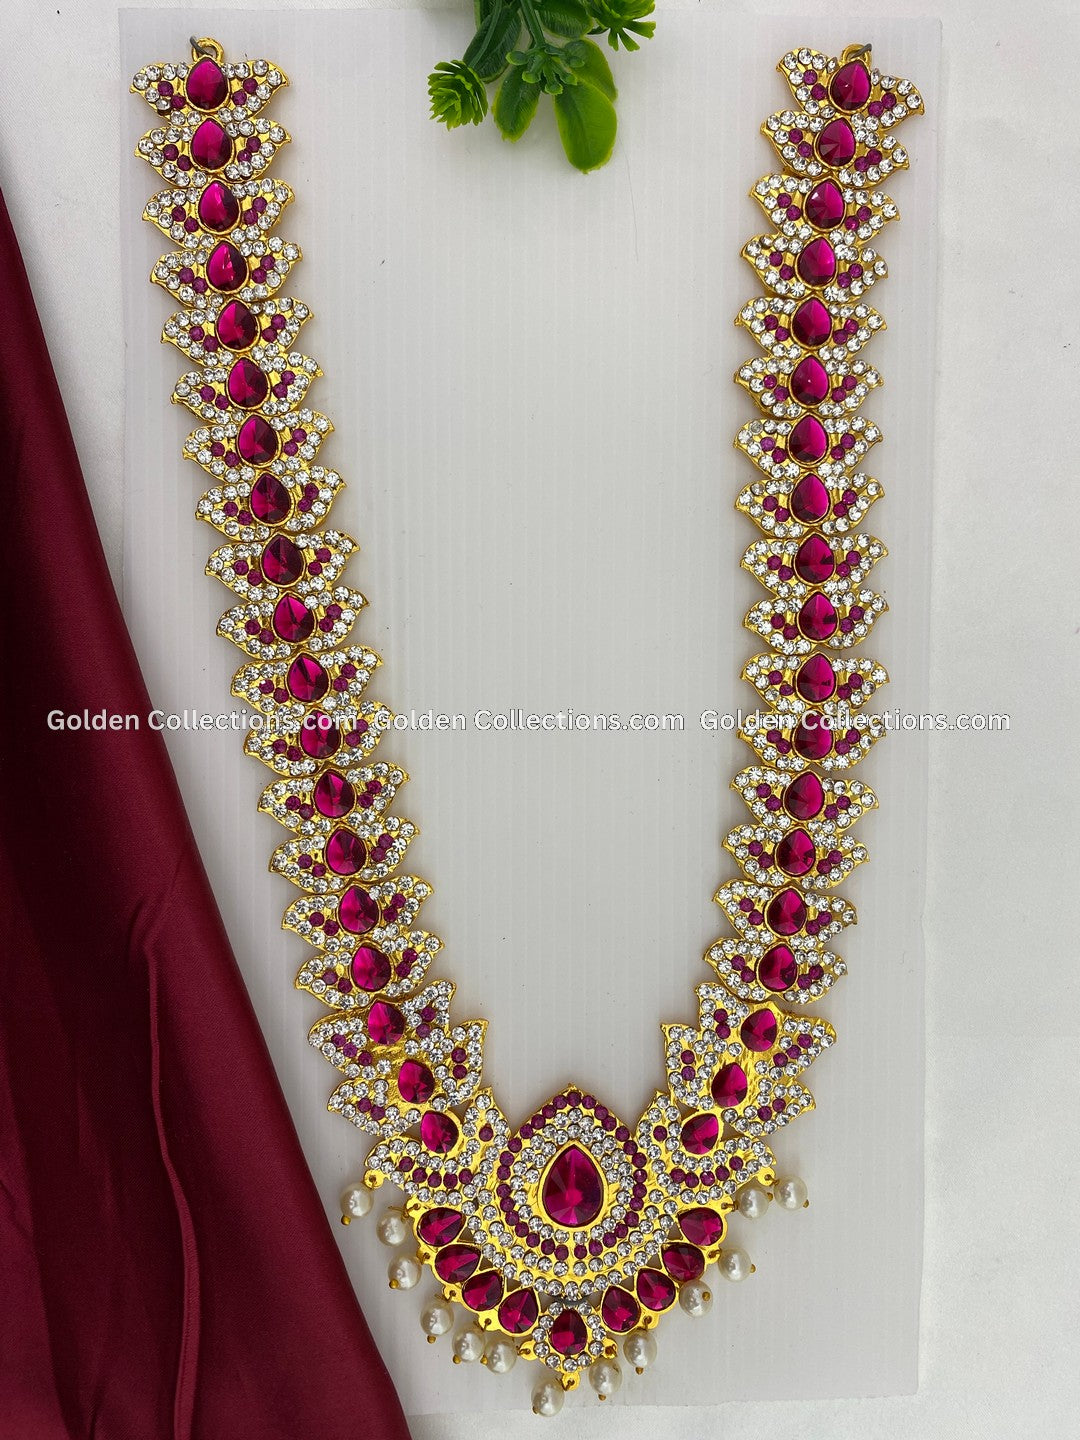 Shop Now Deity Long Necklace - GoldenCollections